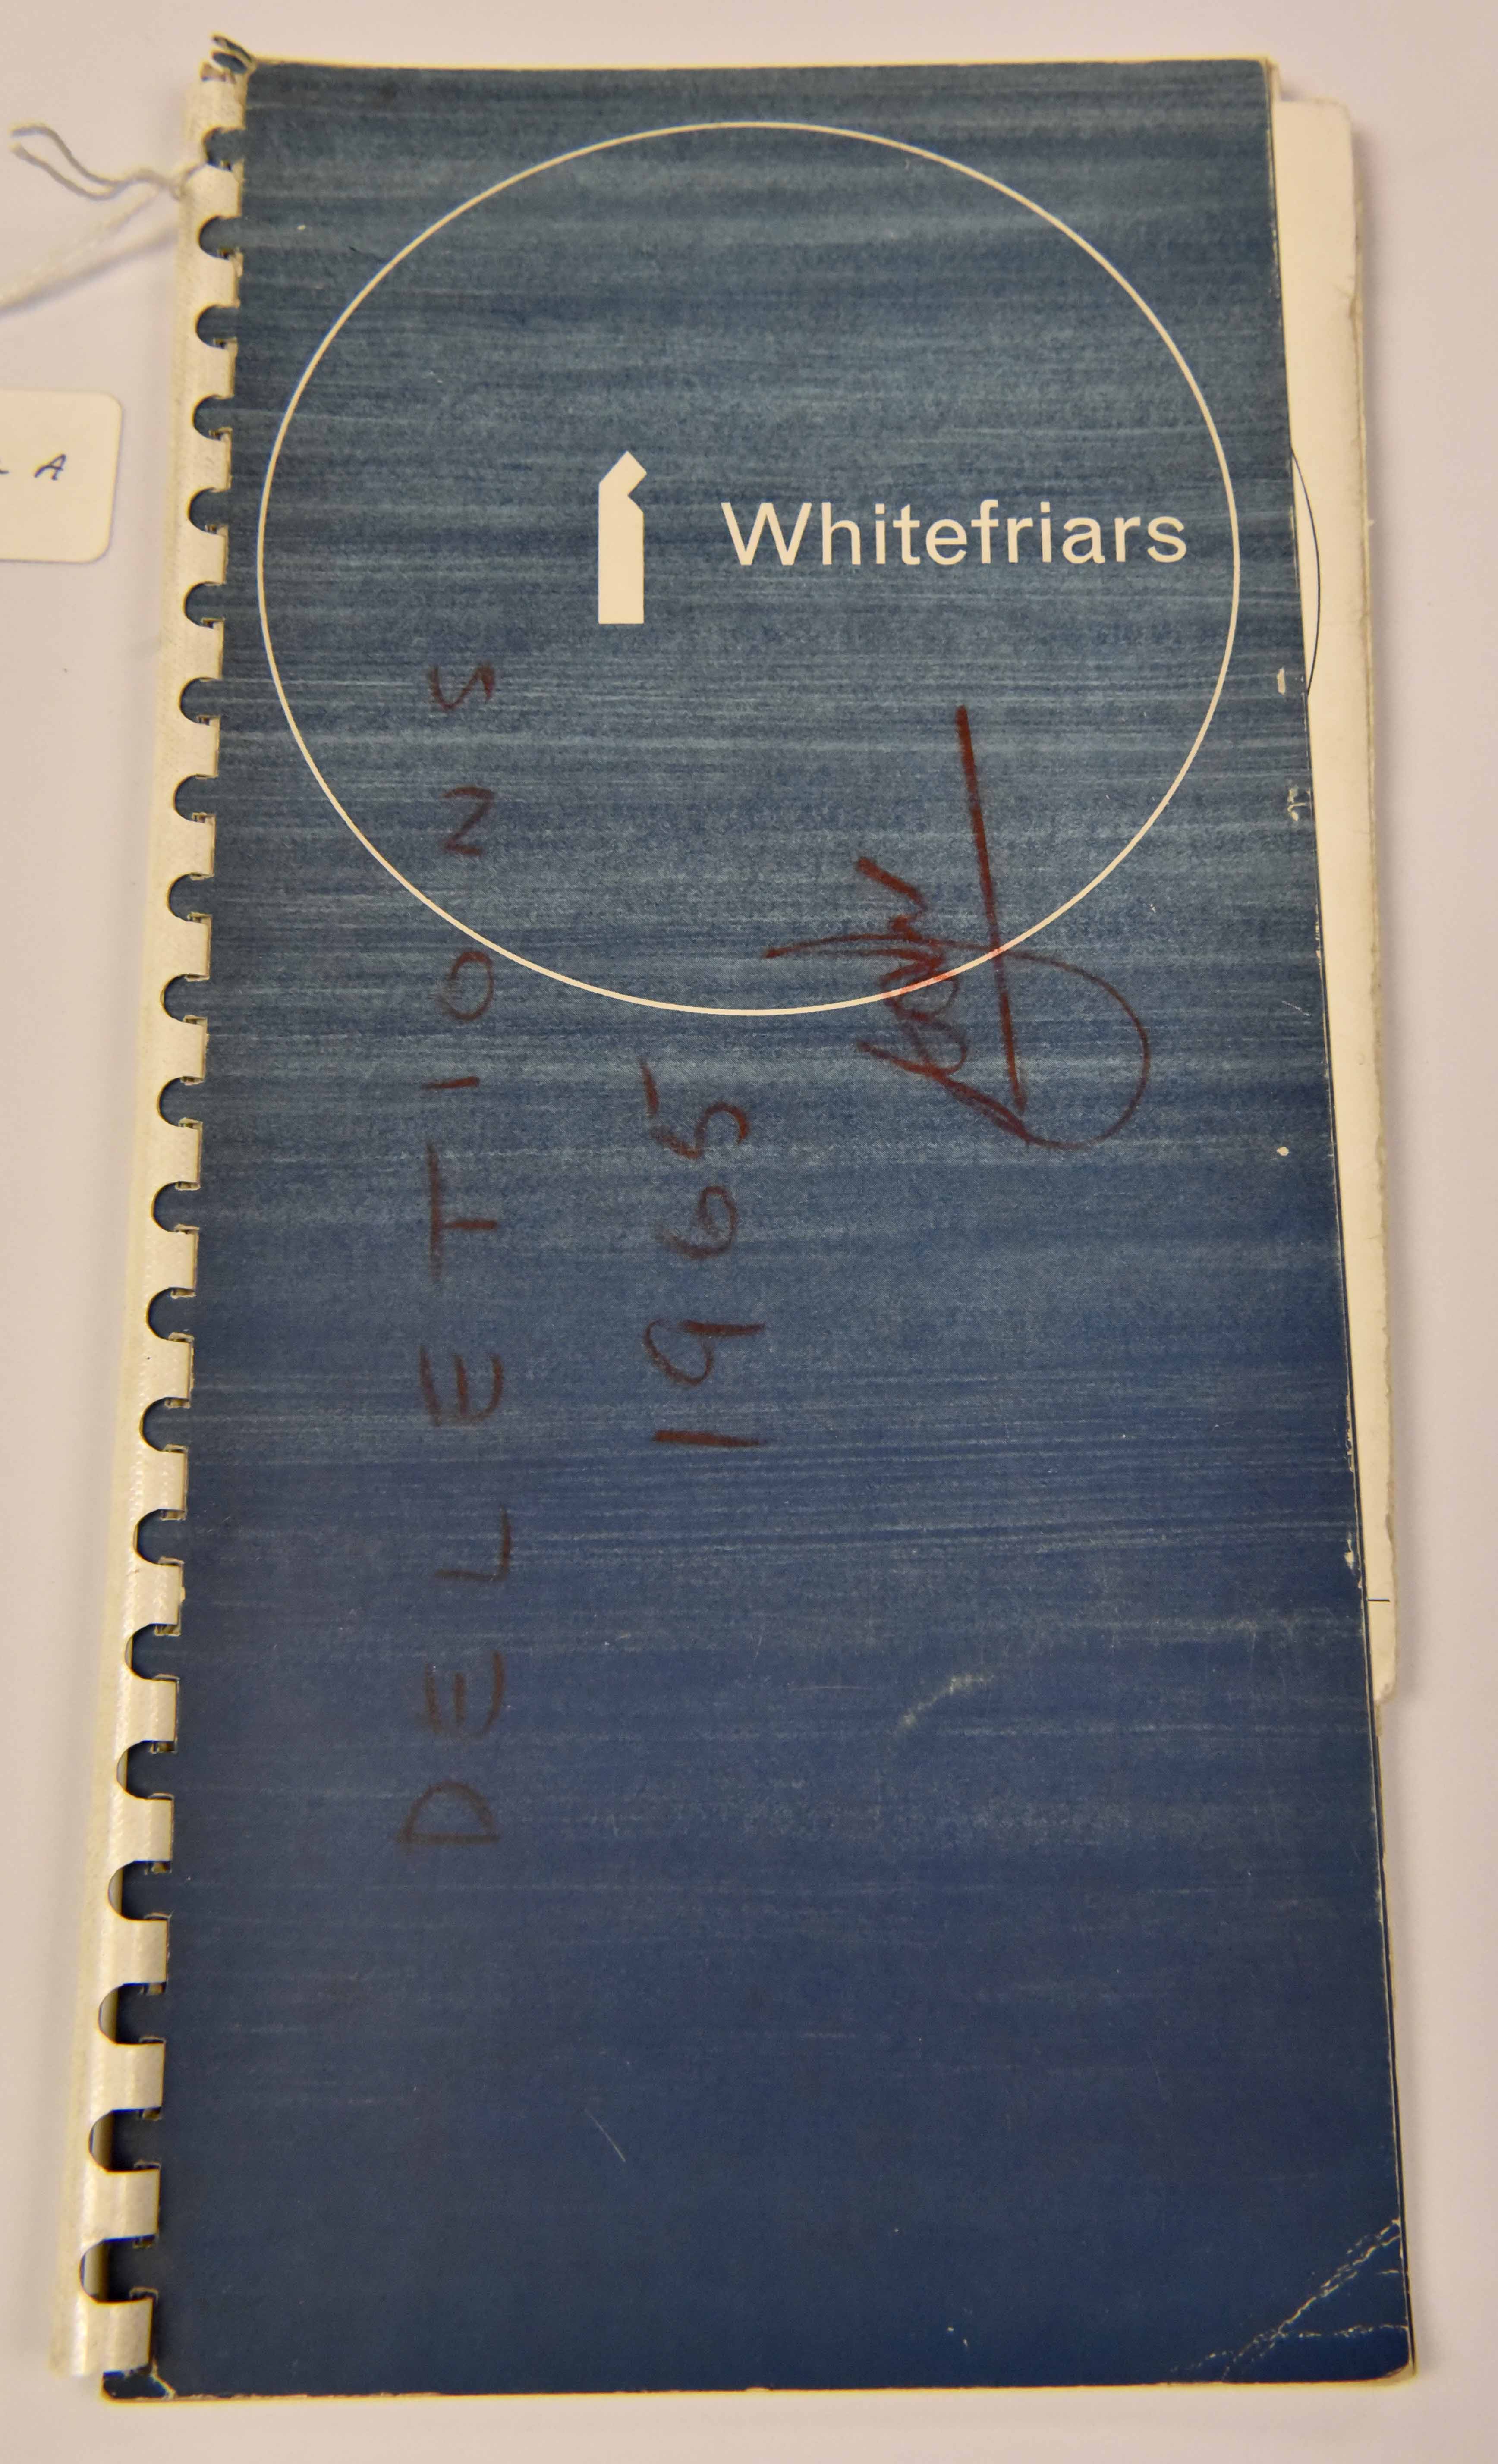 Whitefriars catalogue 1964